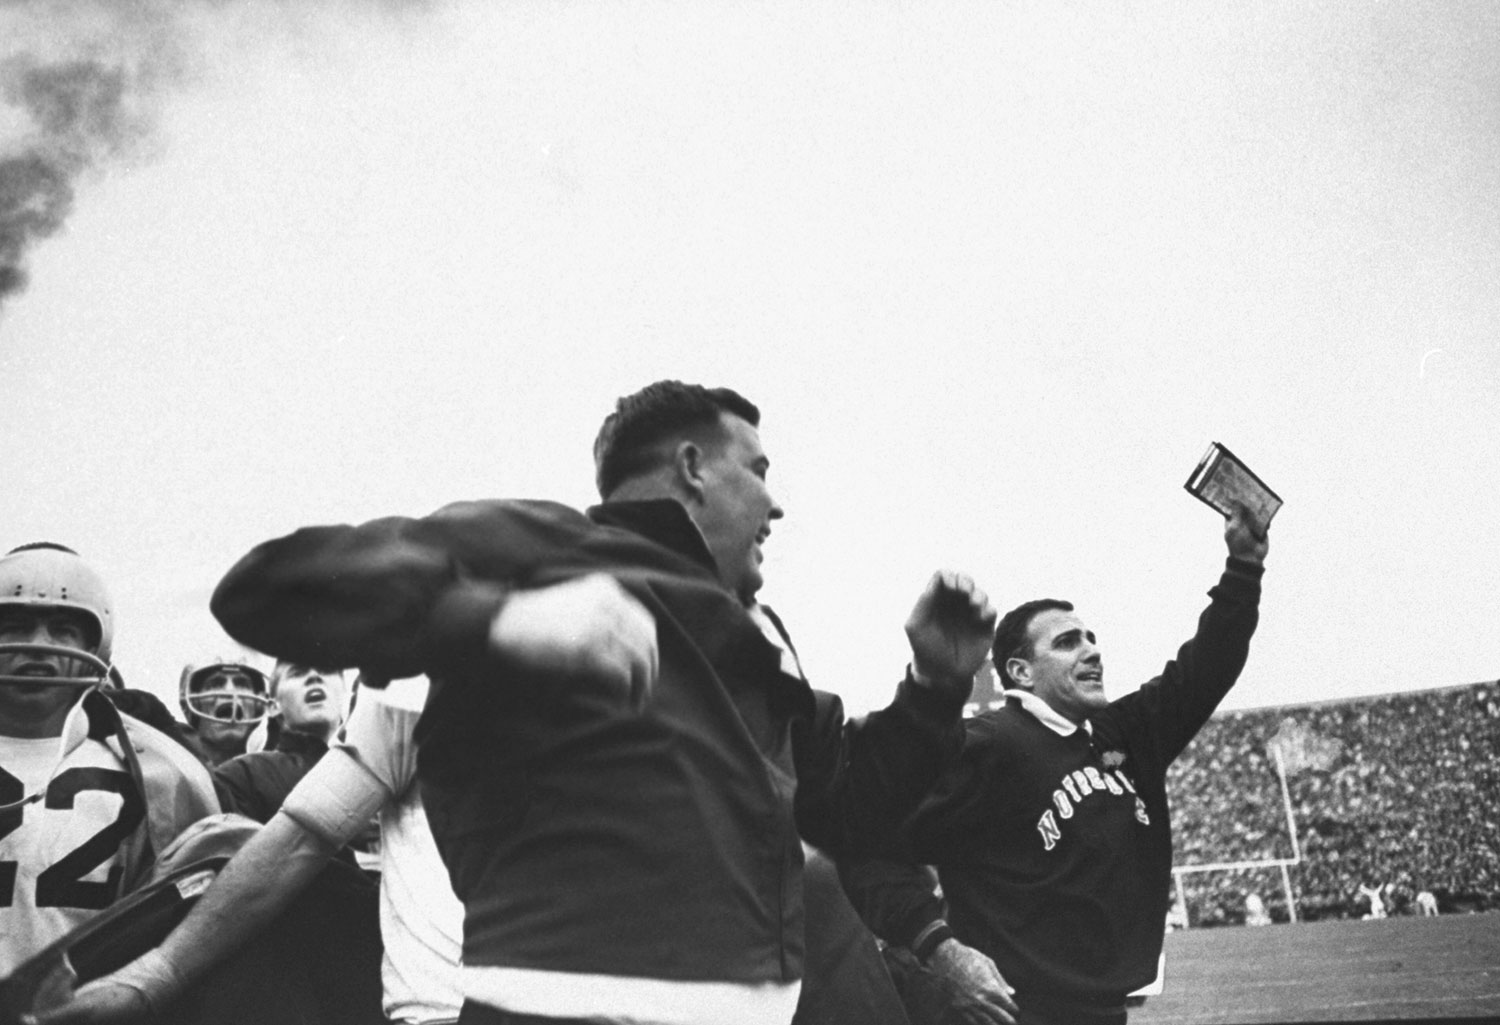 Scene on the Notre Dame sideline, Nov. 19, 1966, before a fourth-quarter field goal attempt against Michigan State. At right, Fighting Irish coach Ara Parseghian.